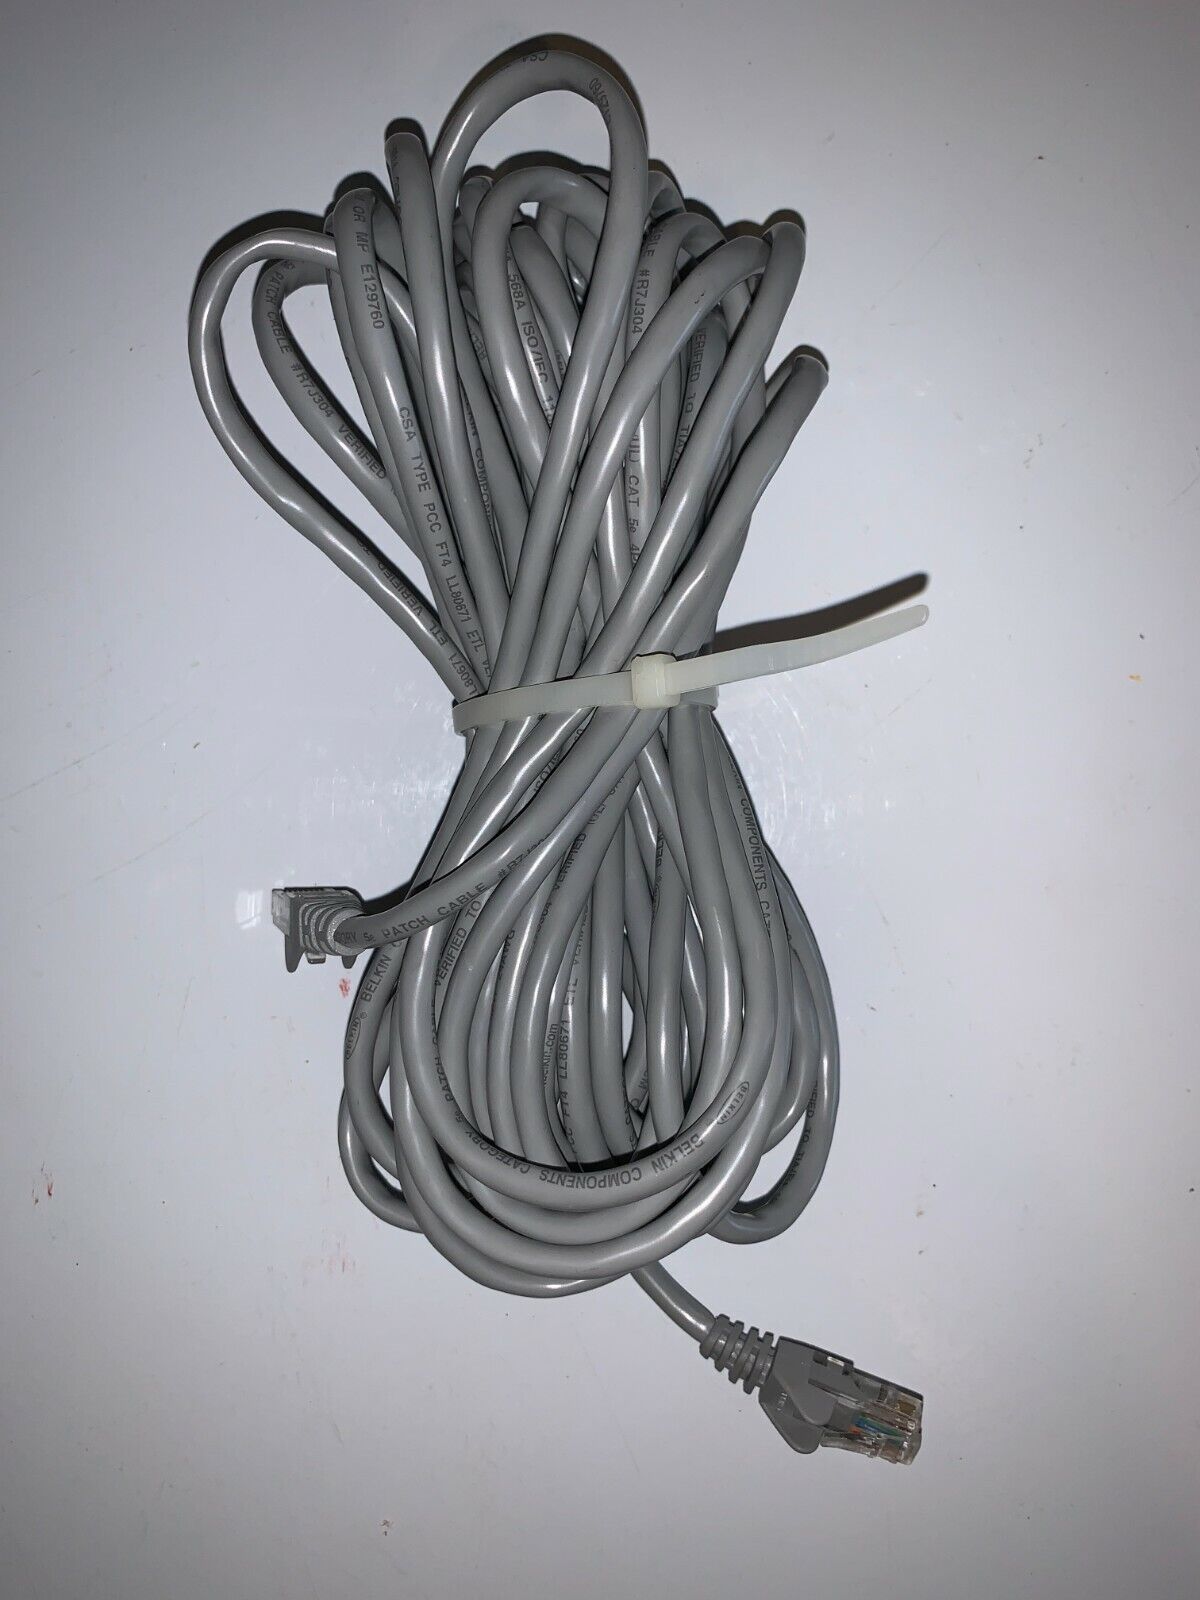 Bundle of Four Unused Ethernet Cables (Two 25 Feet, One 7 Feet, One 6 Feet)